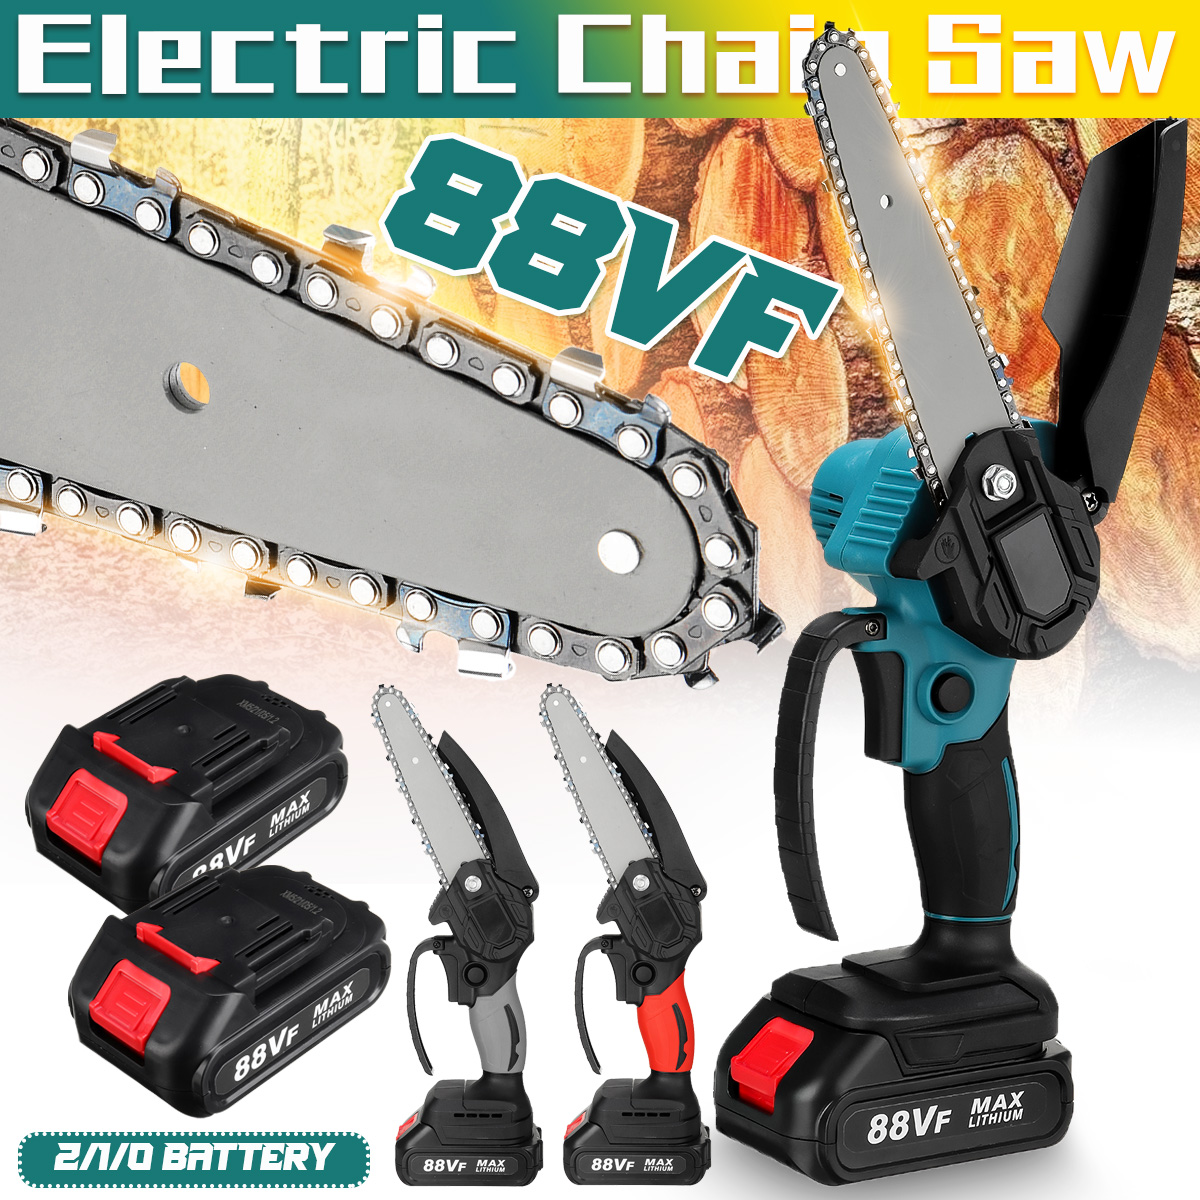 2000W-4000rpm-88VF-6quot-Electric-Saw-Chainsaw-Cordless-Wood-Cutting-Tool-Chainsaw-withwithout-Batte-1938018-1